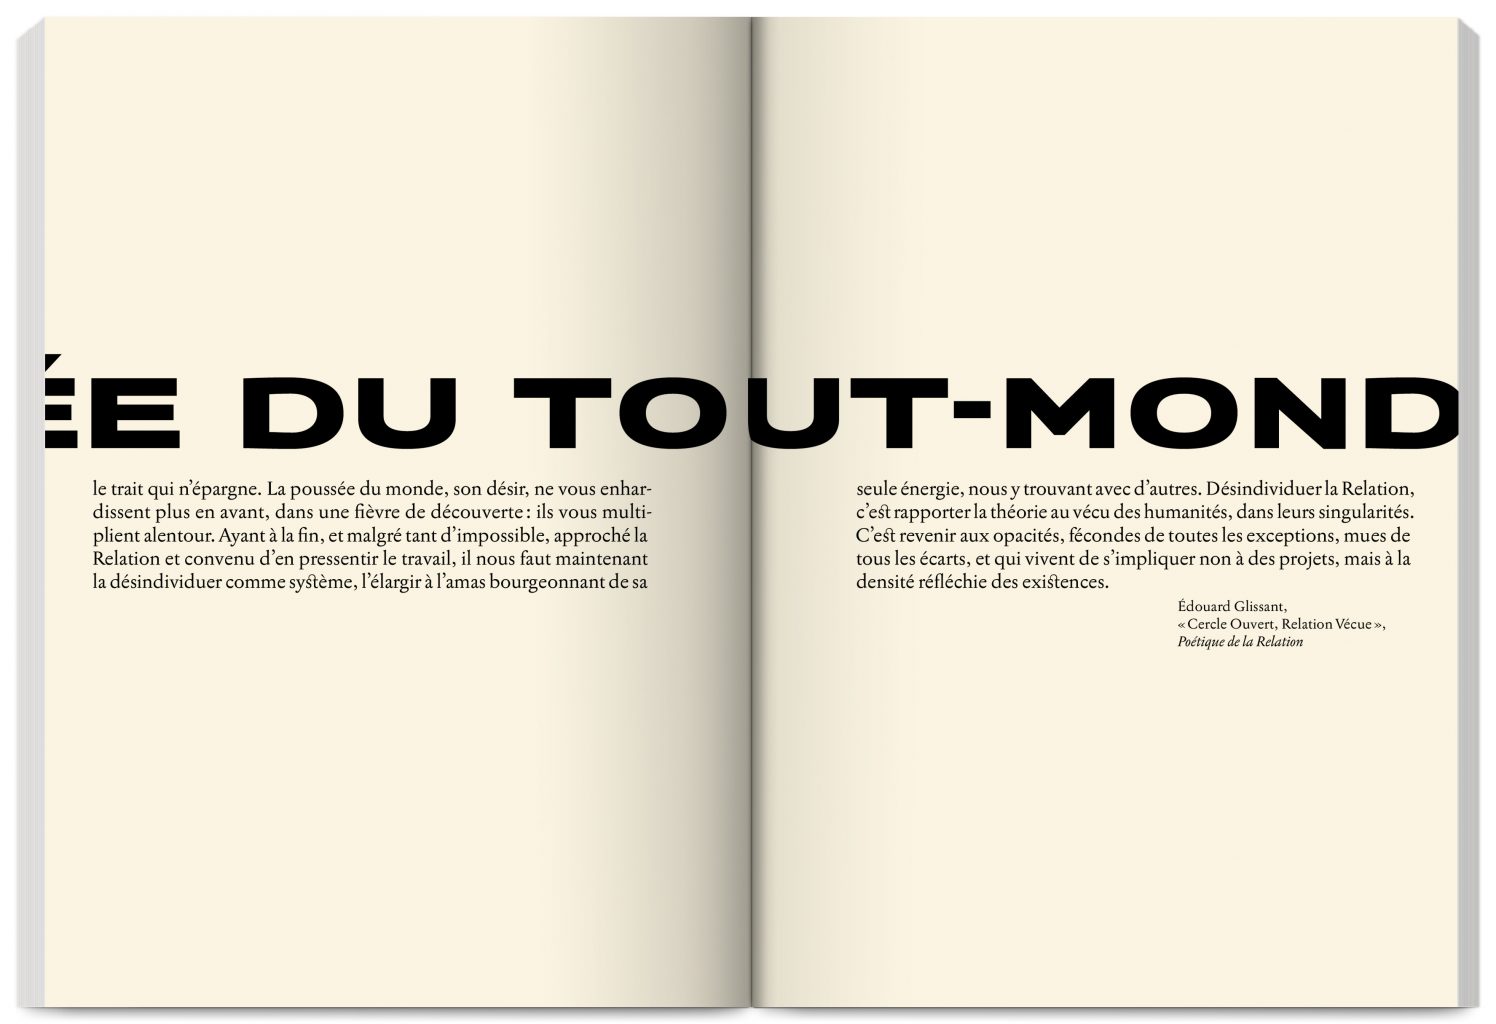 Publication Mondialité: or the Archipelagos of Édouard Glissant edited by Hans Ulrich Obrist, Asad Raza, published by Skira, Villa Empain Fondation Boghossian, design by In the shade of a tree studio, founded by Sophie Demay and Maël Fournier Comte.